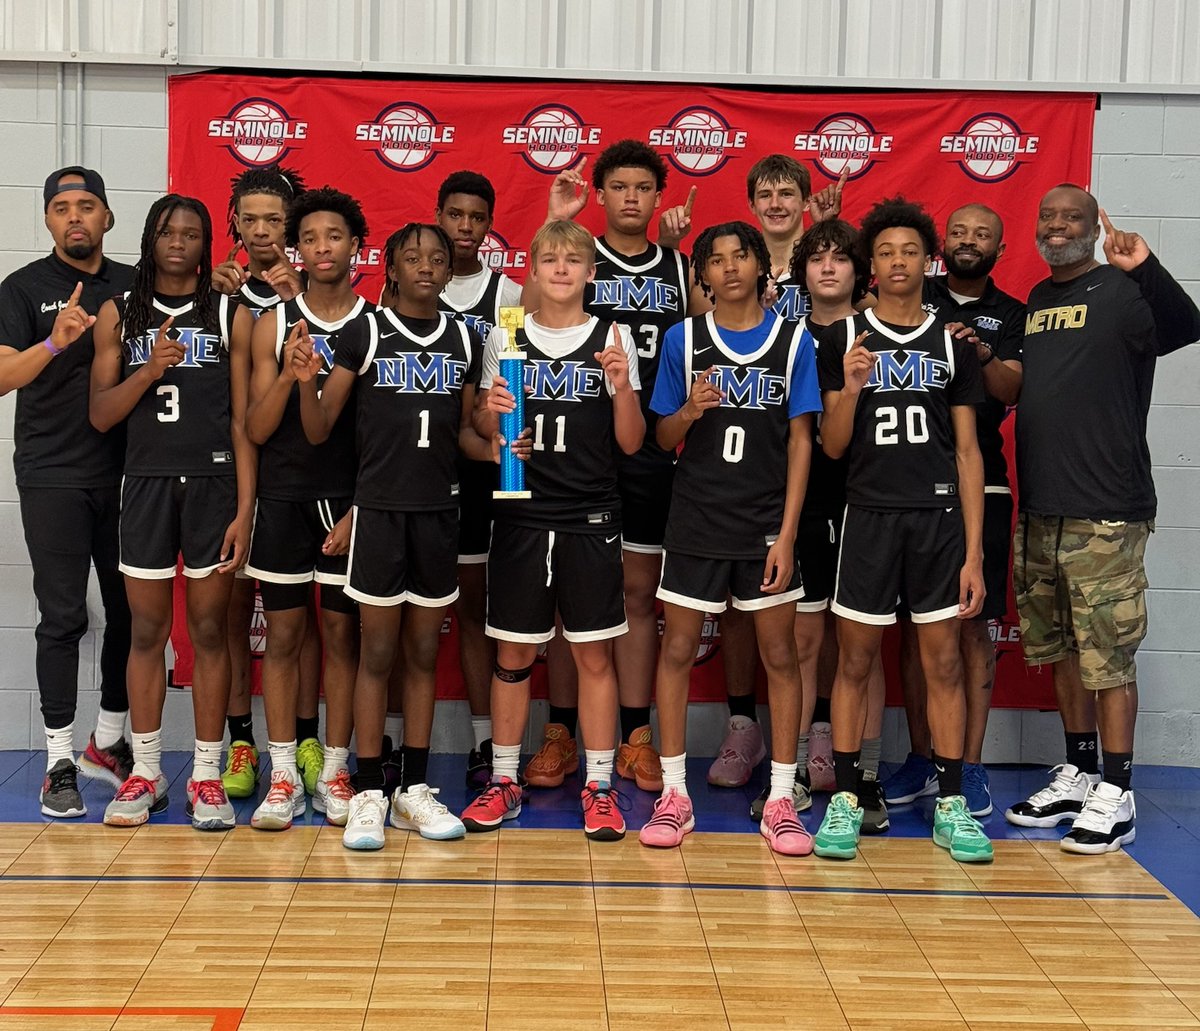 NME 14U National does it again....except for 1 bad shooting half, we would be 4/4 on trophies instead of 3/4. FULL recap on szn so far coming up.... But in this post - 'THE CHAMPIONS' bring home another trophy from 'The Battle for Central FLA', beating RTG 49-37 in the title gm!